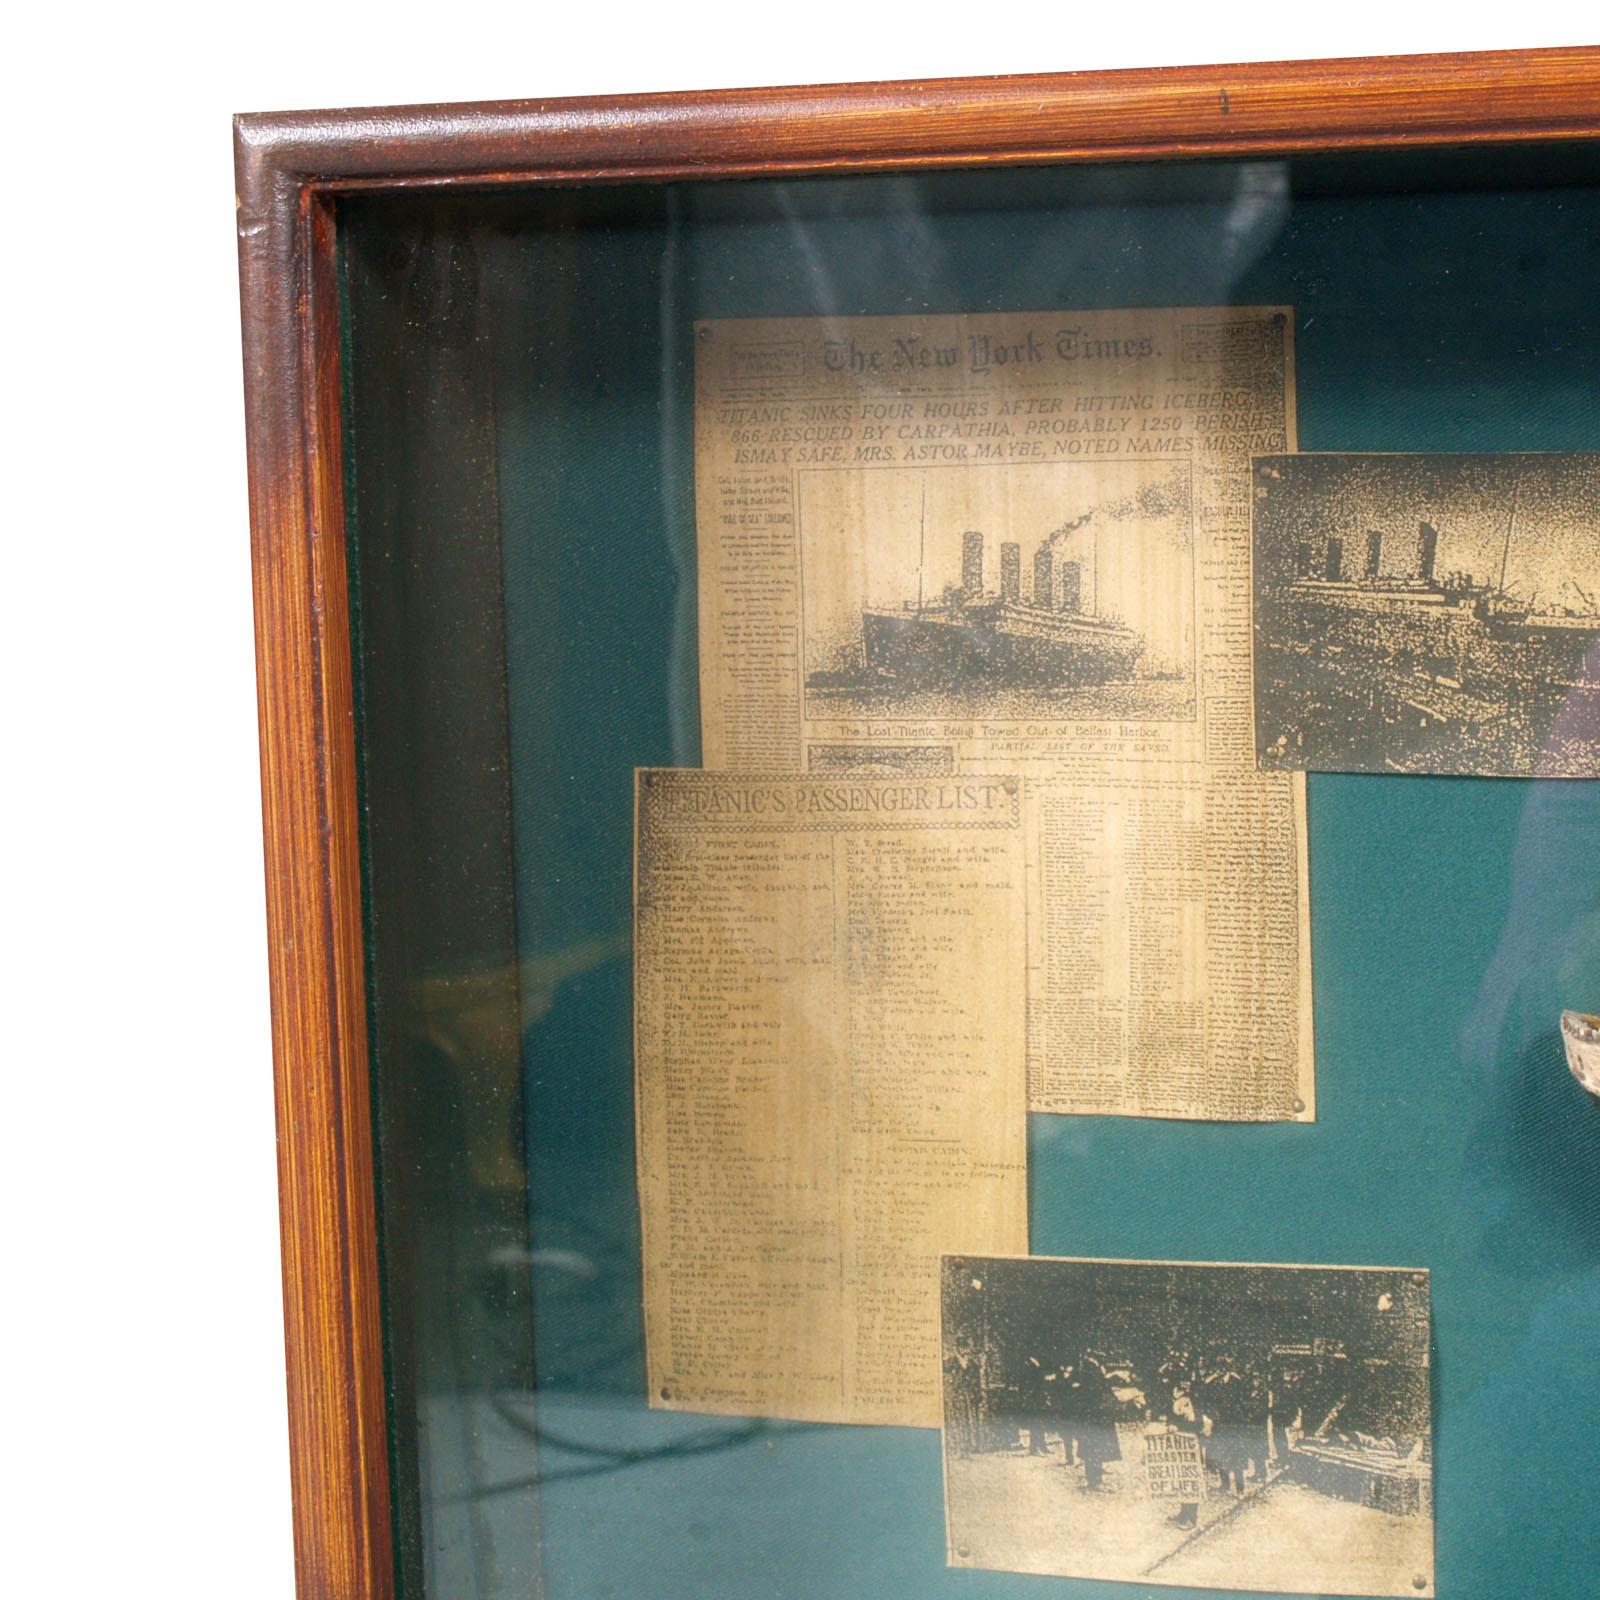 1960s model of the Titanic ship on display case with newspaper clippings describing the event.

Measures: H 34 x W 108 x D 9 cm.